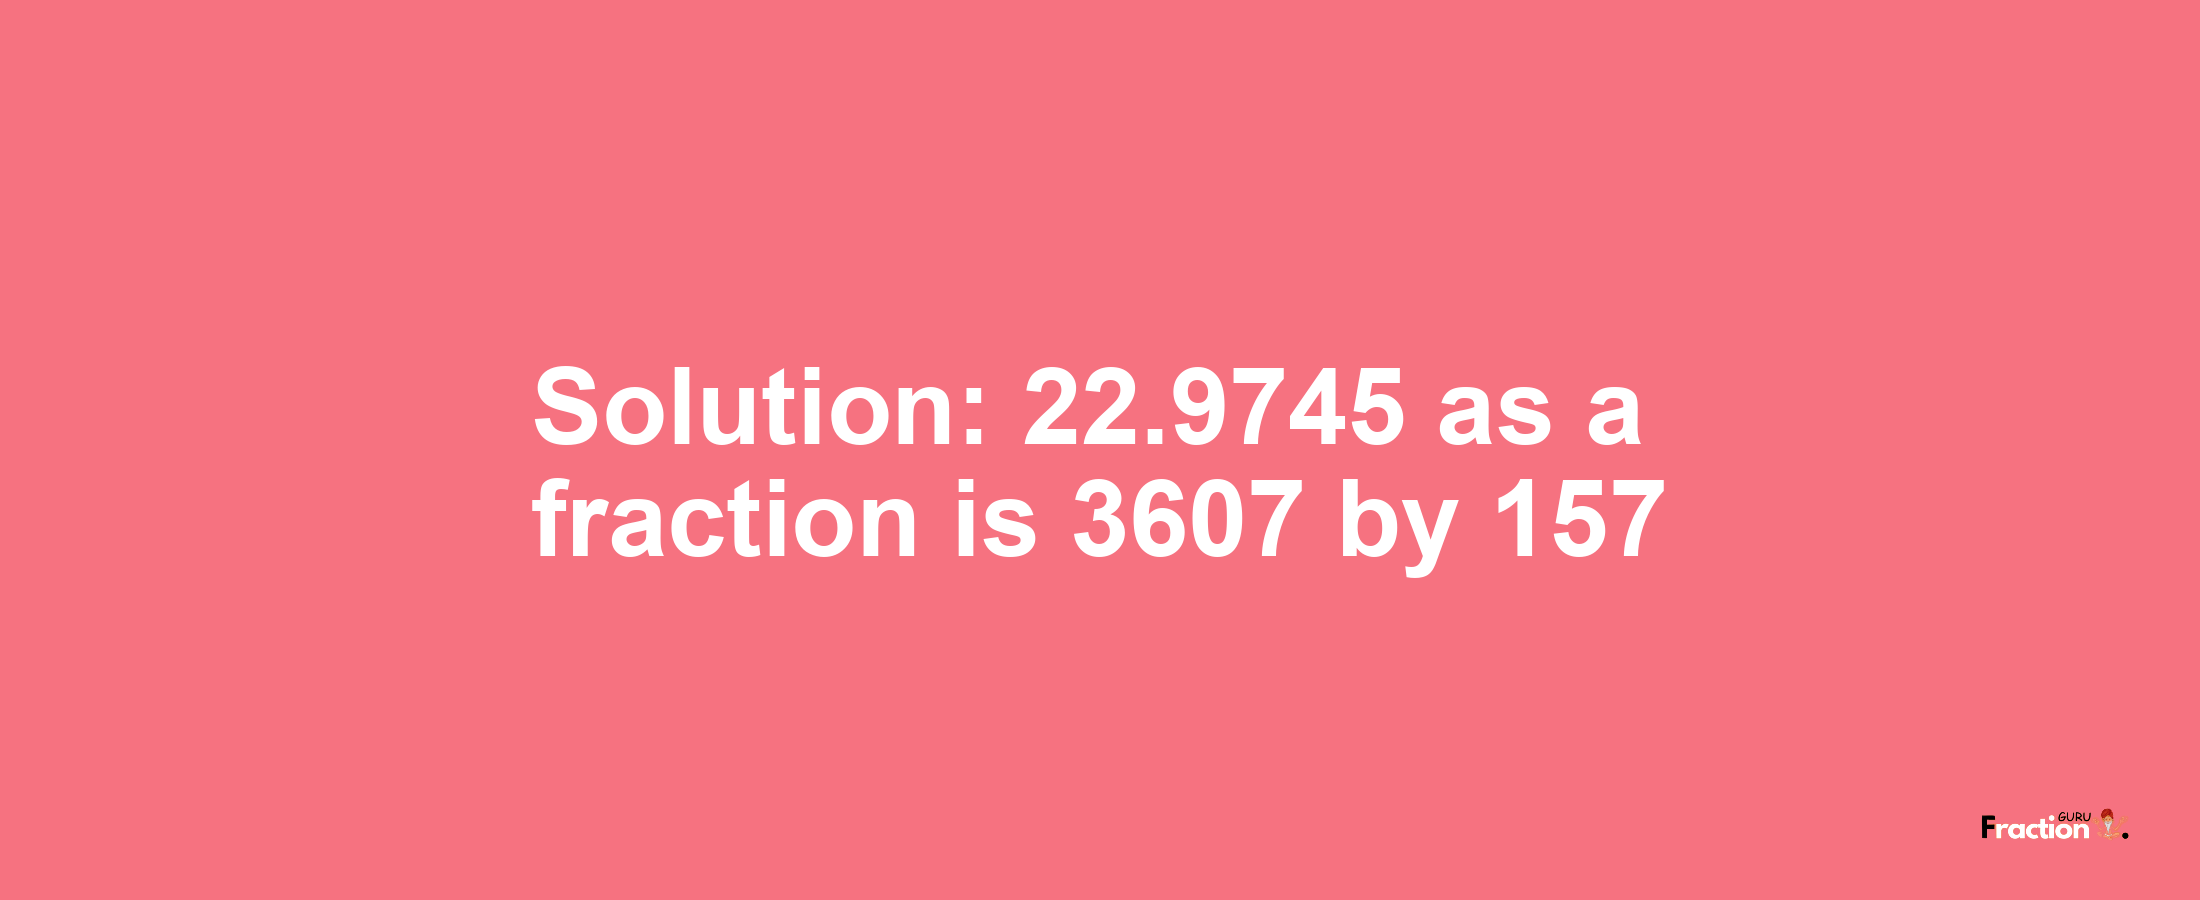 Solution:22.9745 as a fraction is 3607/157